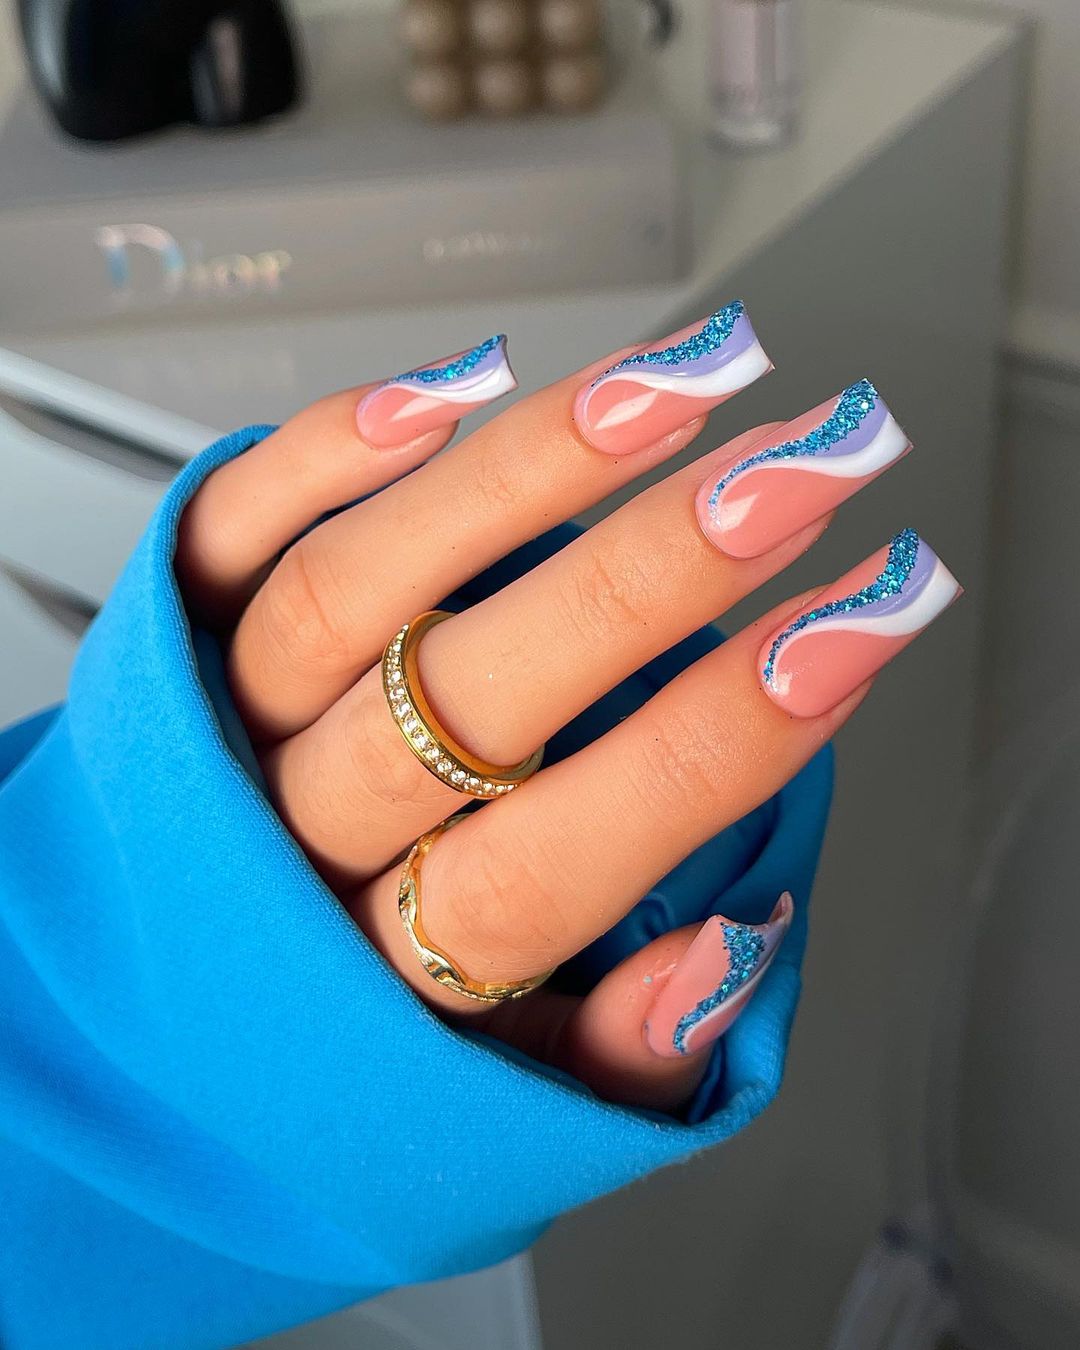 Square Nude Nails with Blue Swirl Design